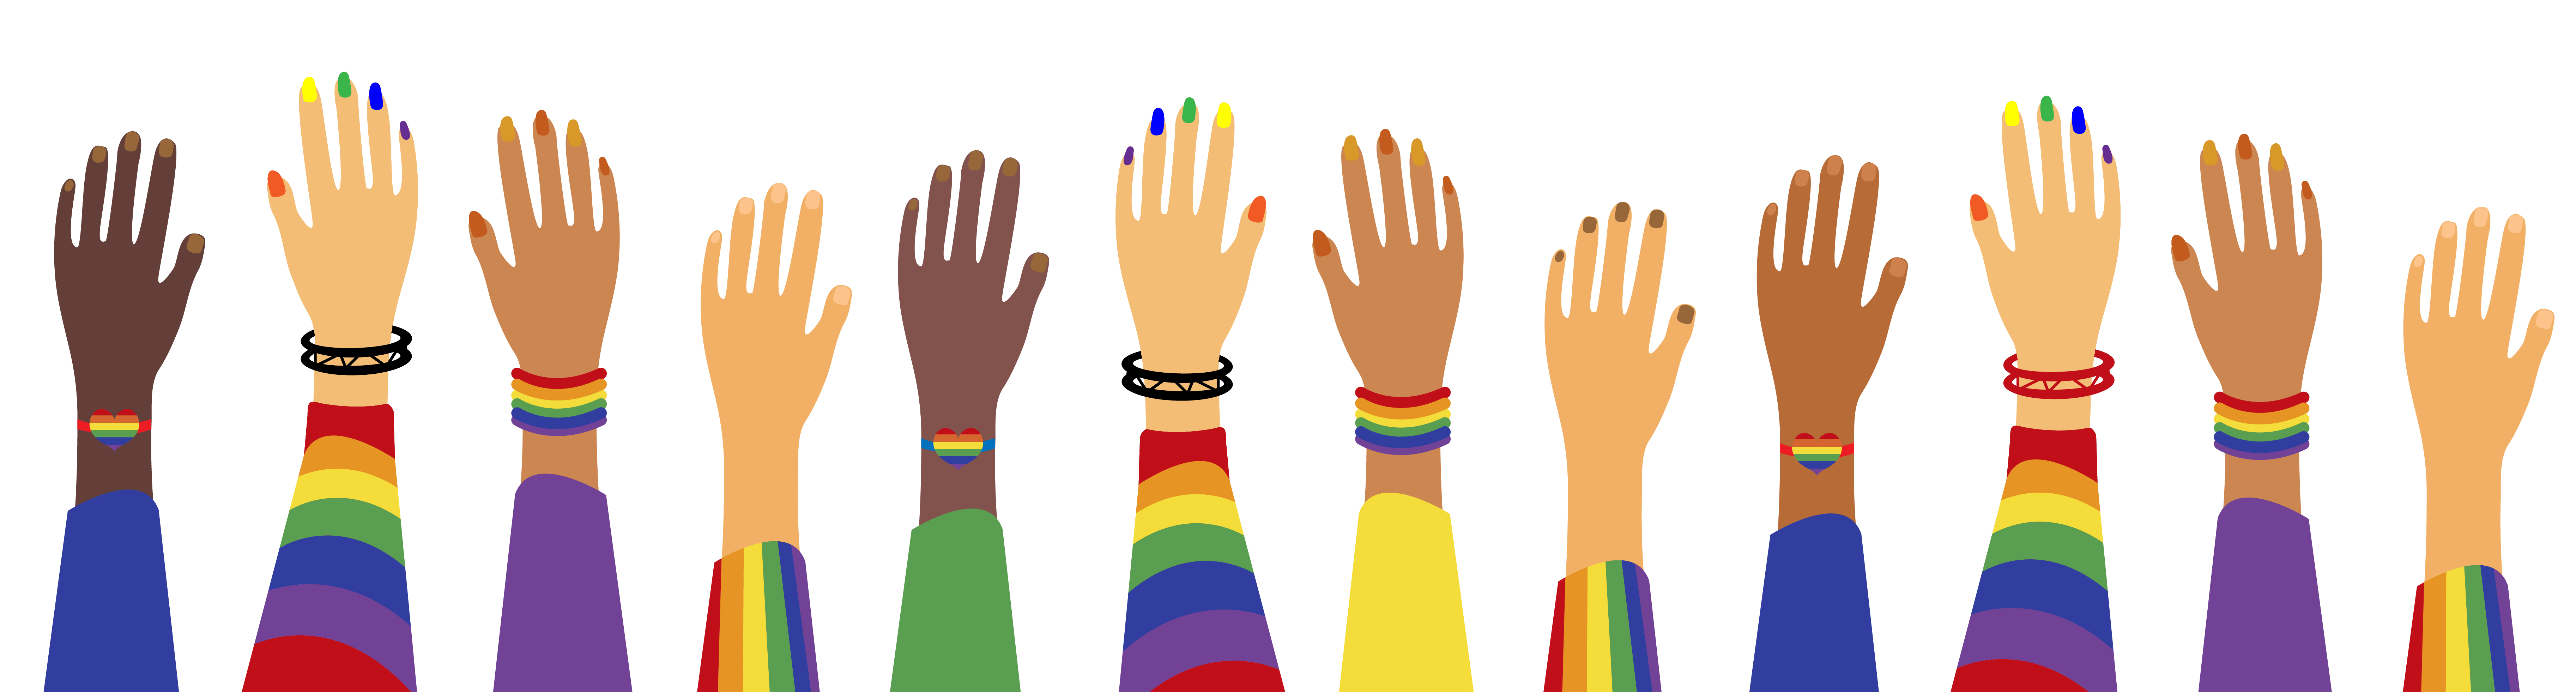 Hands wearing colorful rainbow clothes and jewelry